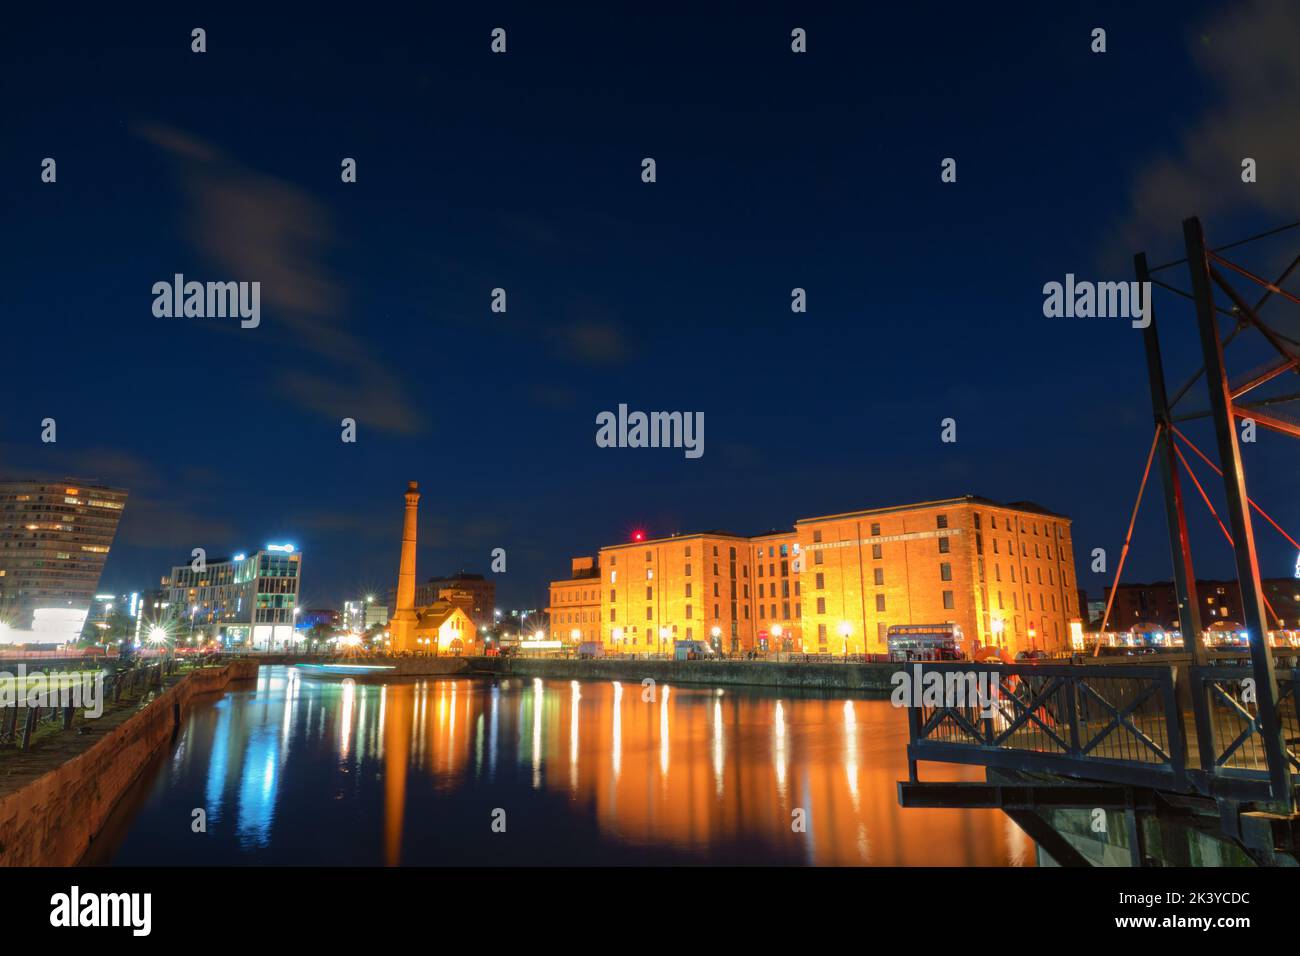 Slow shutter long exposure of the Albert Dock Liverpool just after sunset Stock Photo